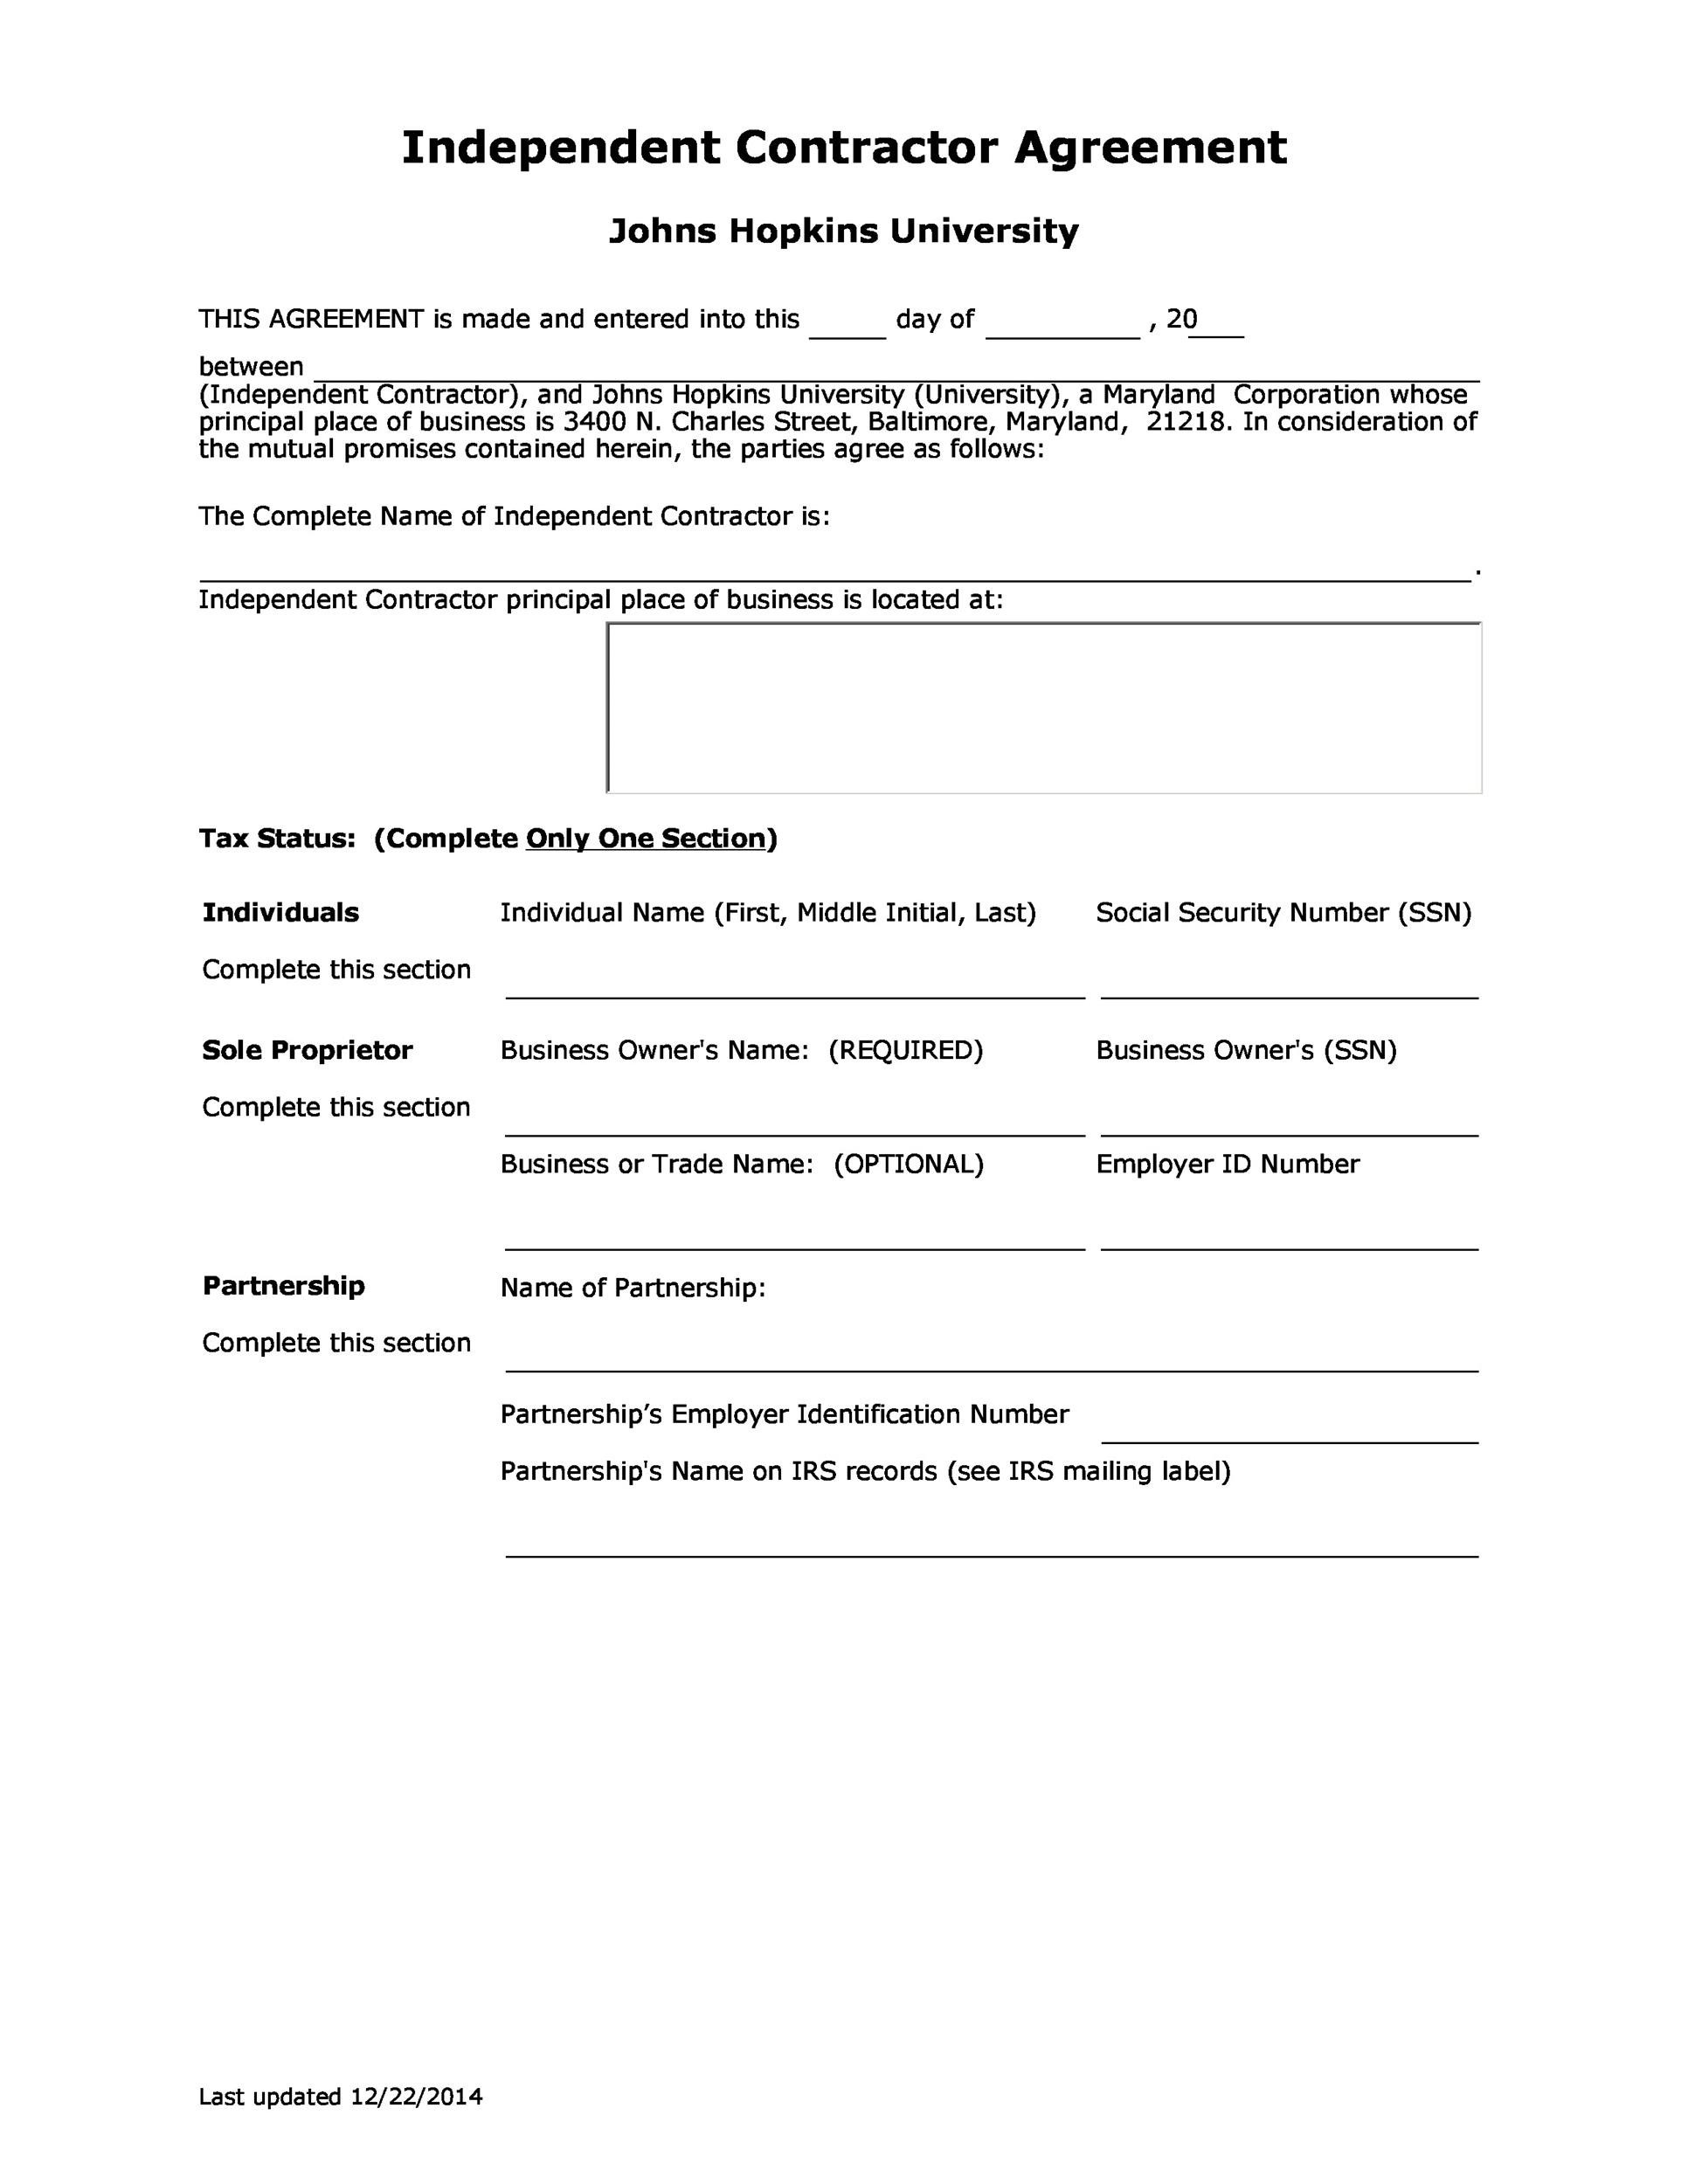 50  FREE Independent Contractor Agreement Forms Templates